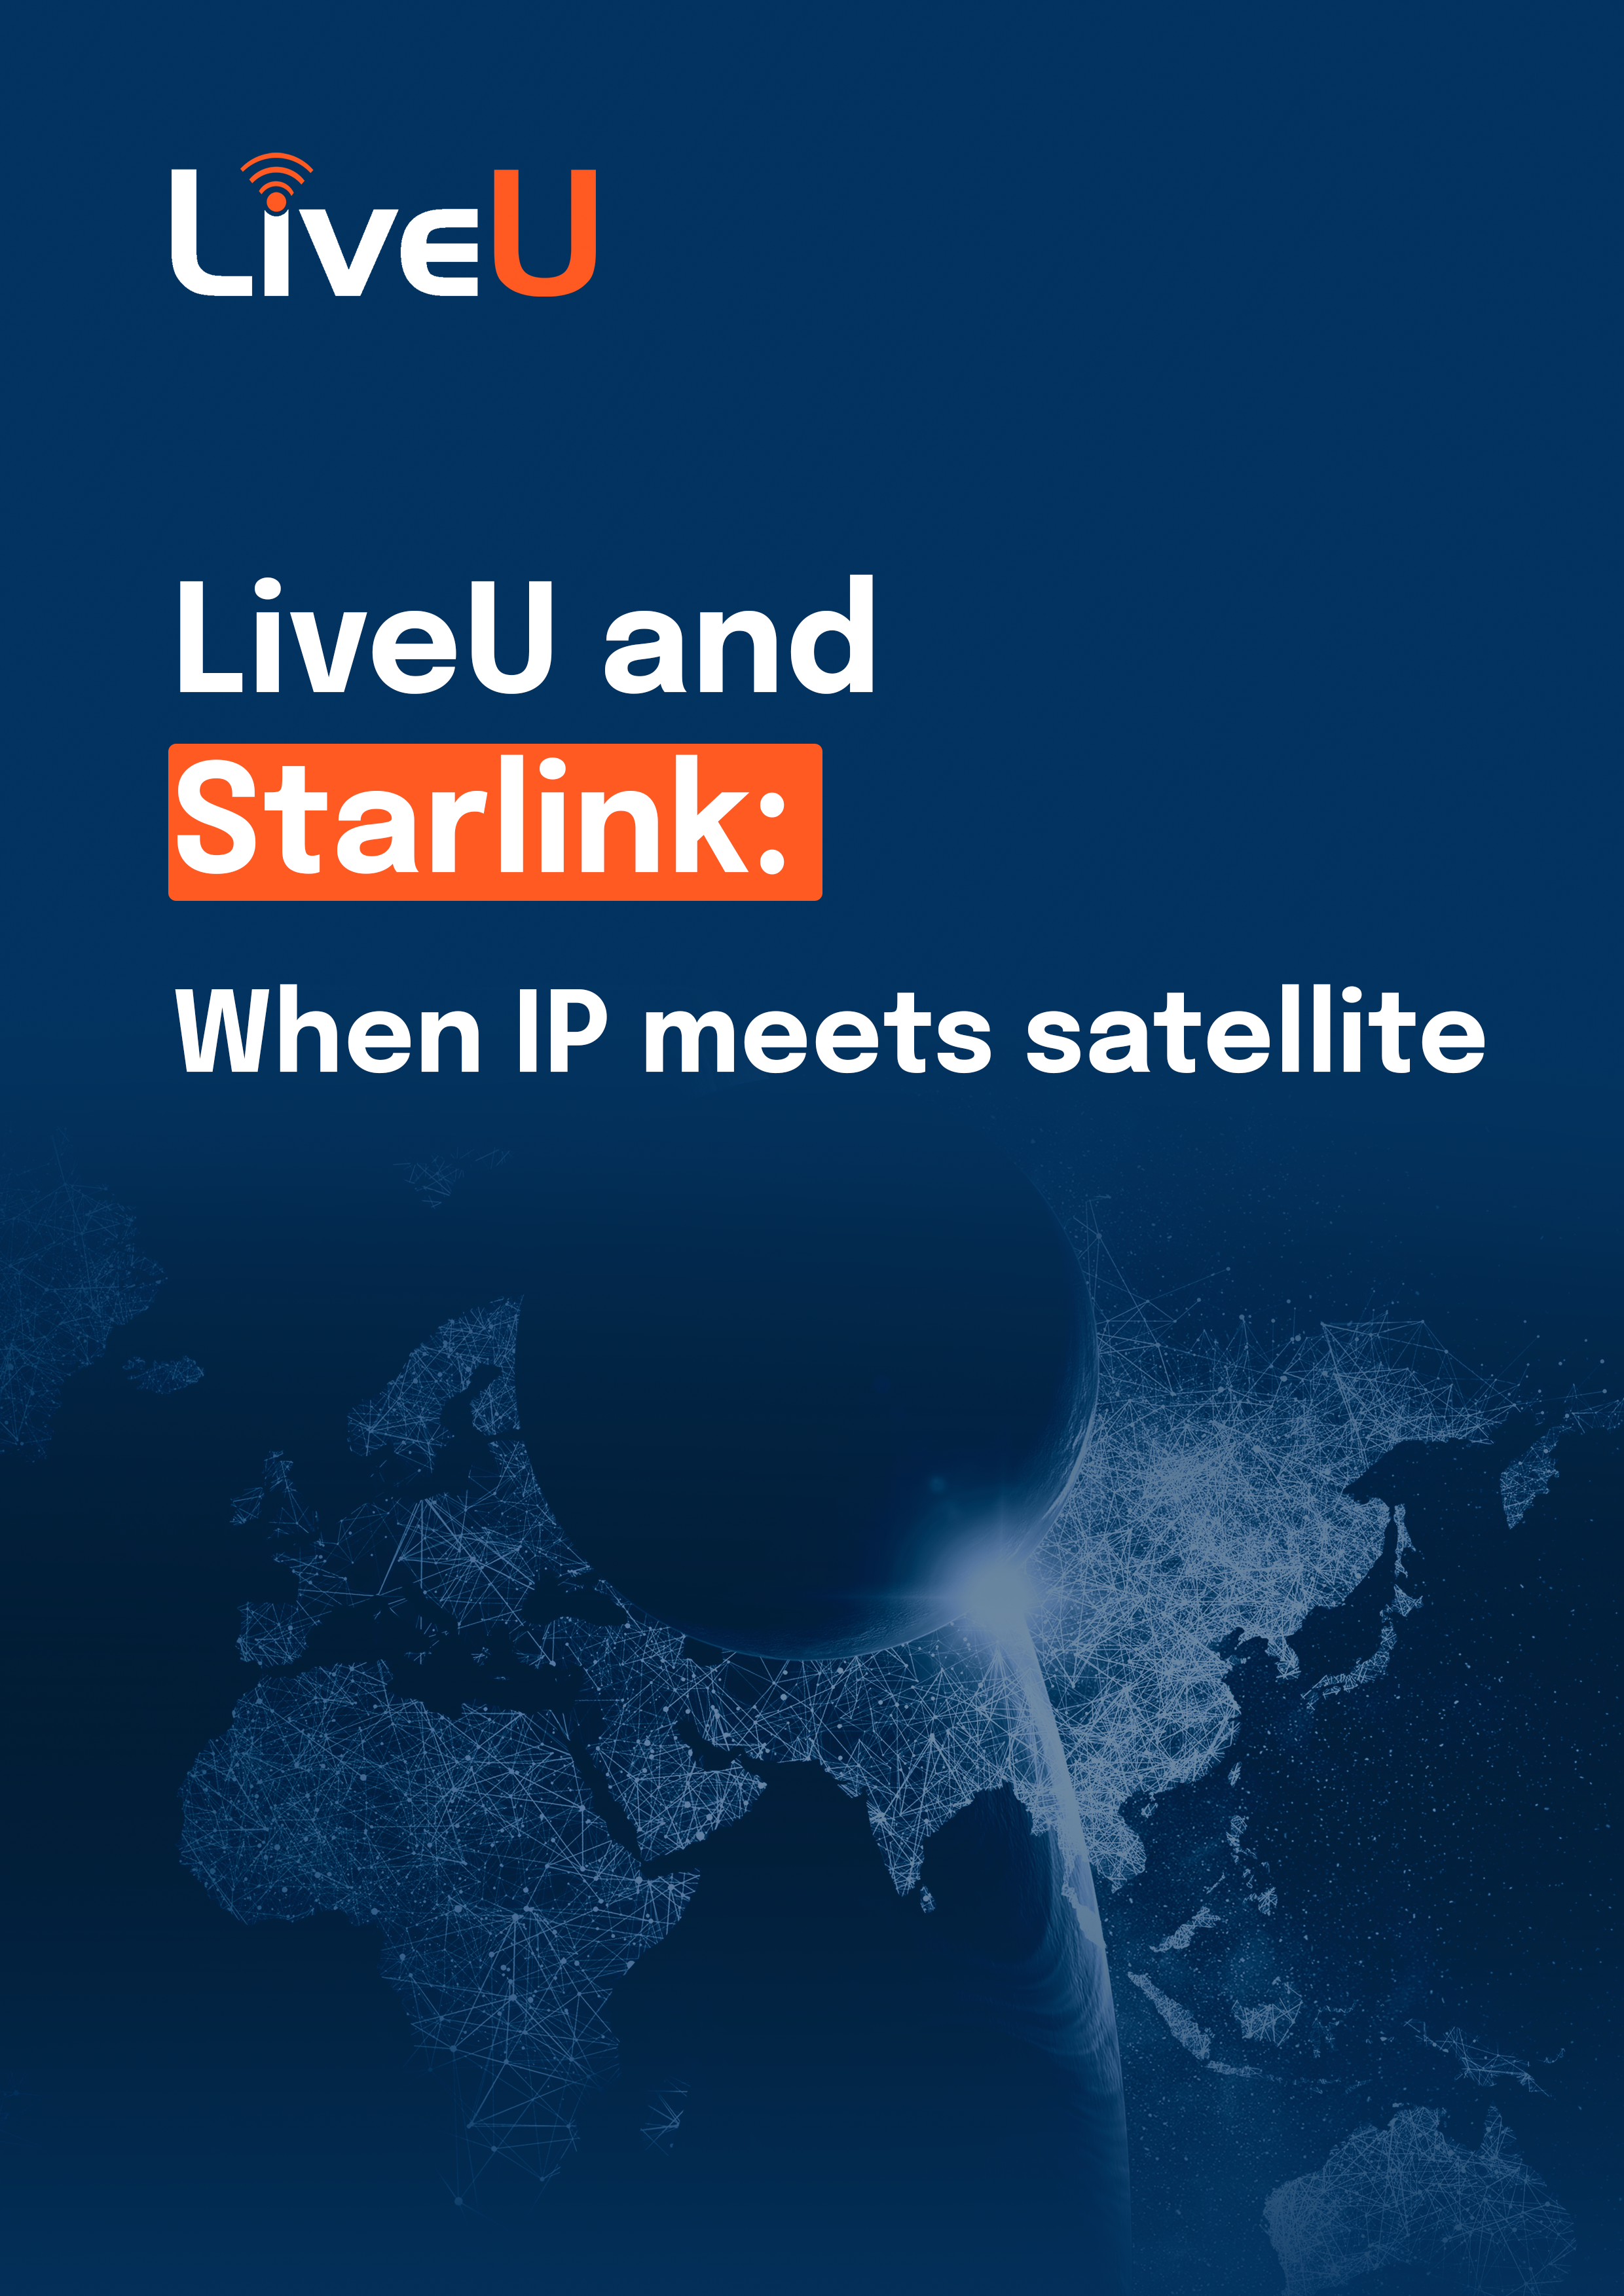 LiveU and Starlink: When IP meets satellite